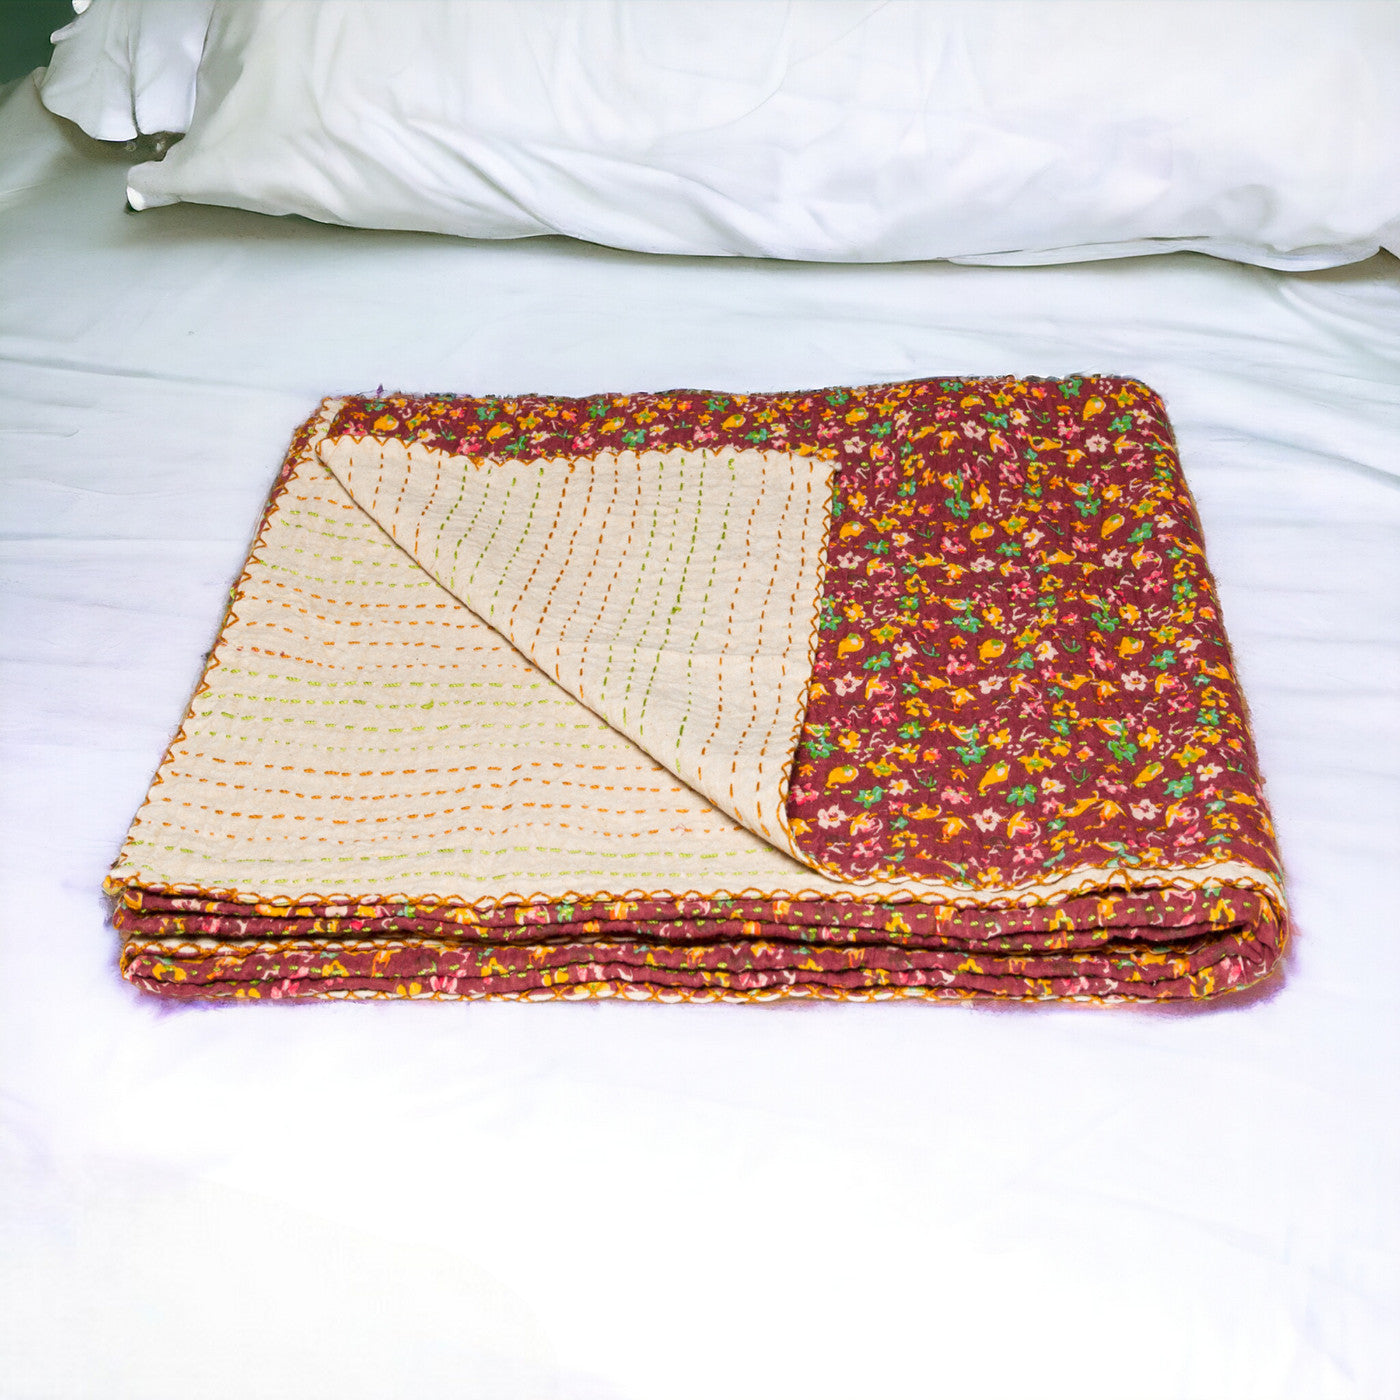 70" X 50" Beige Pink Orange and Green Kantha Cotton Floral Throw Blanket with Embroidery